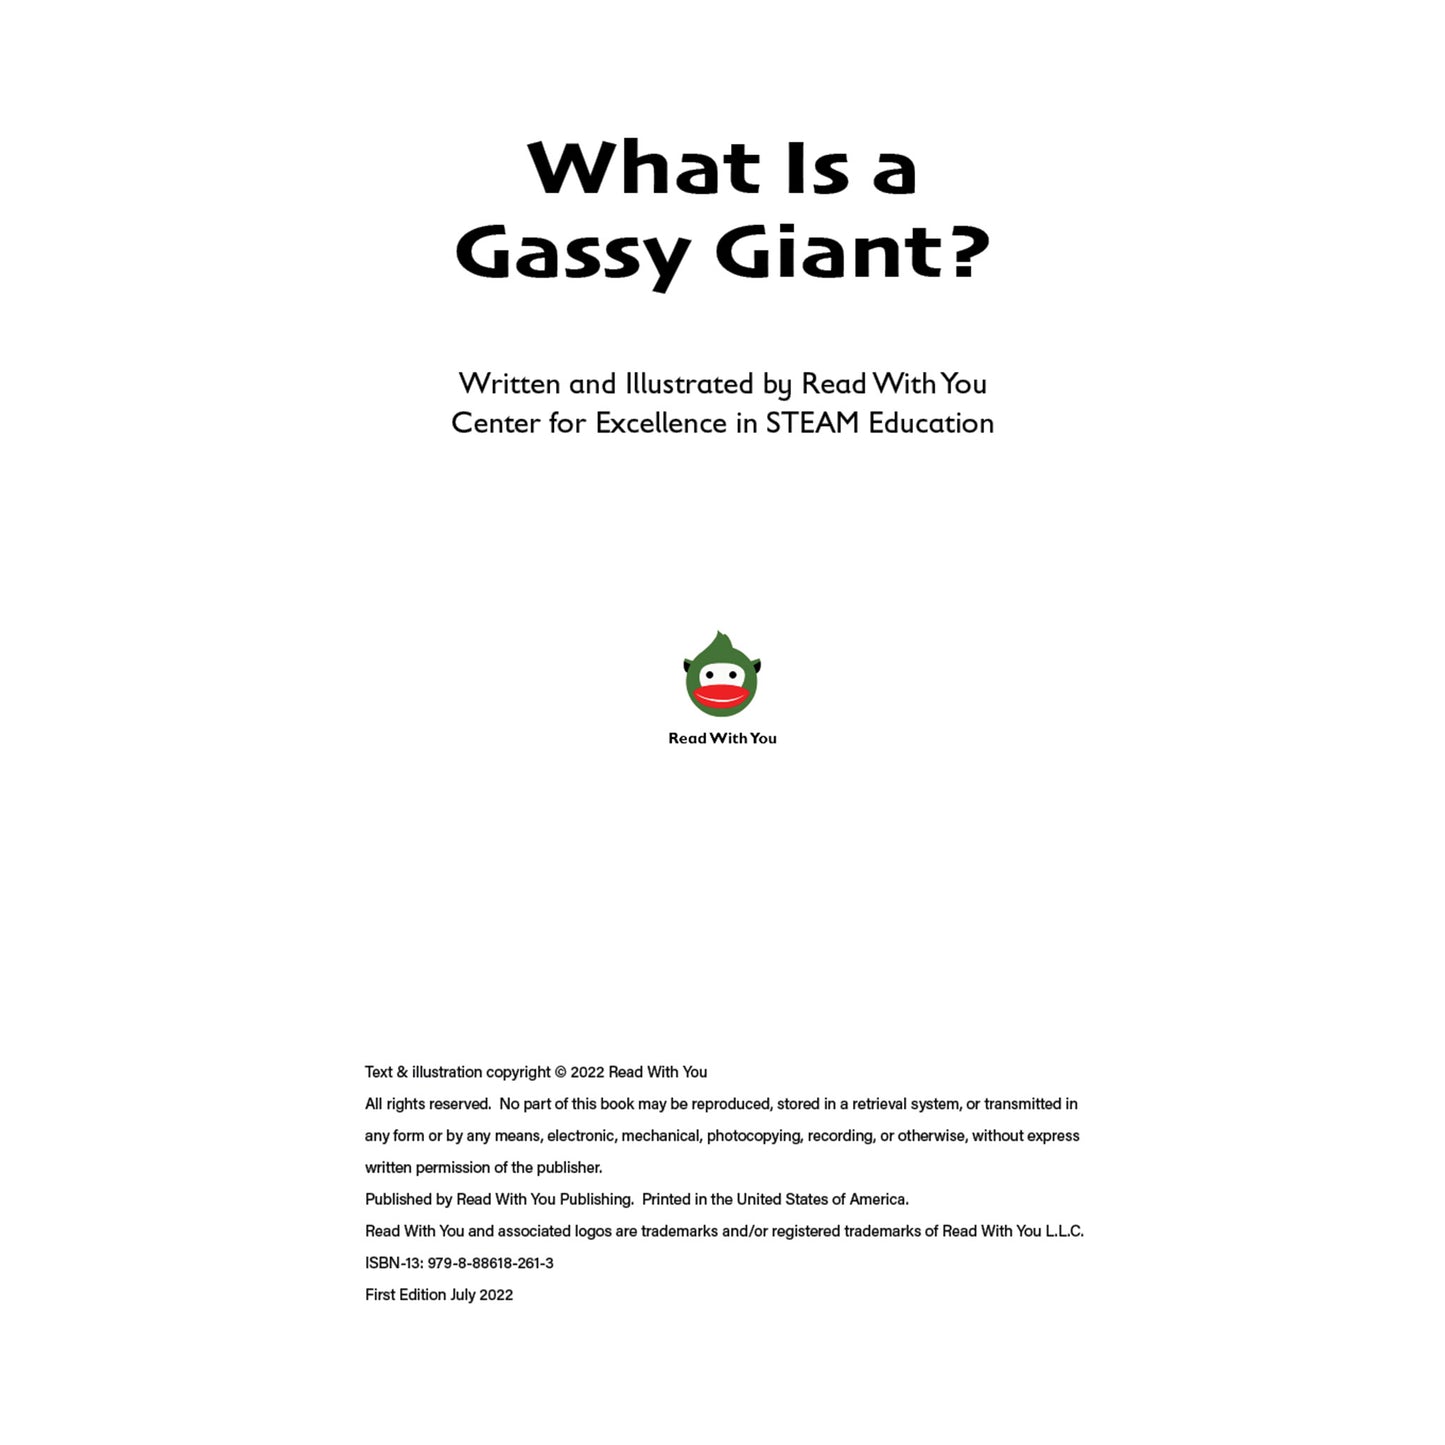 What is a Gassy Giant?